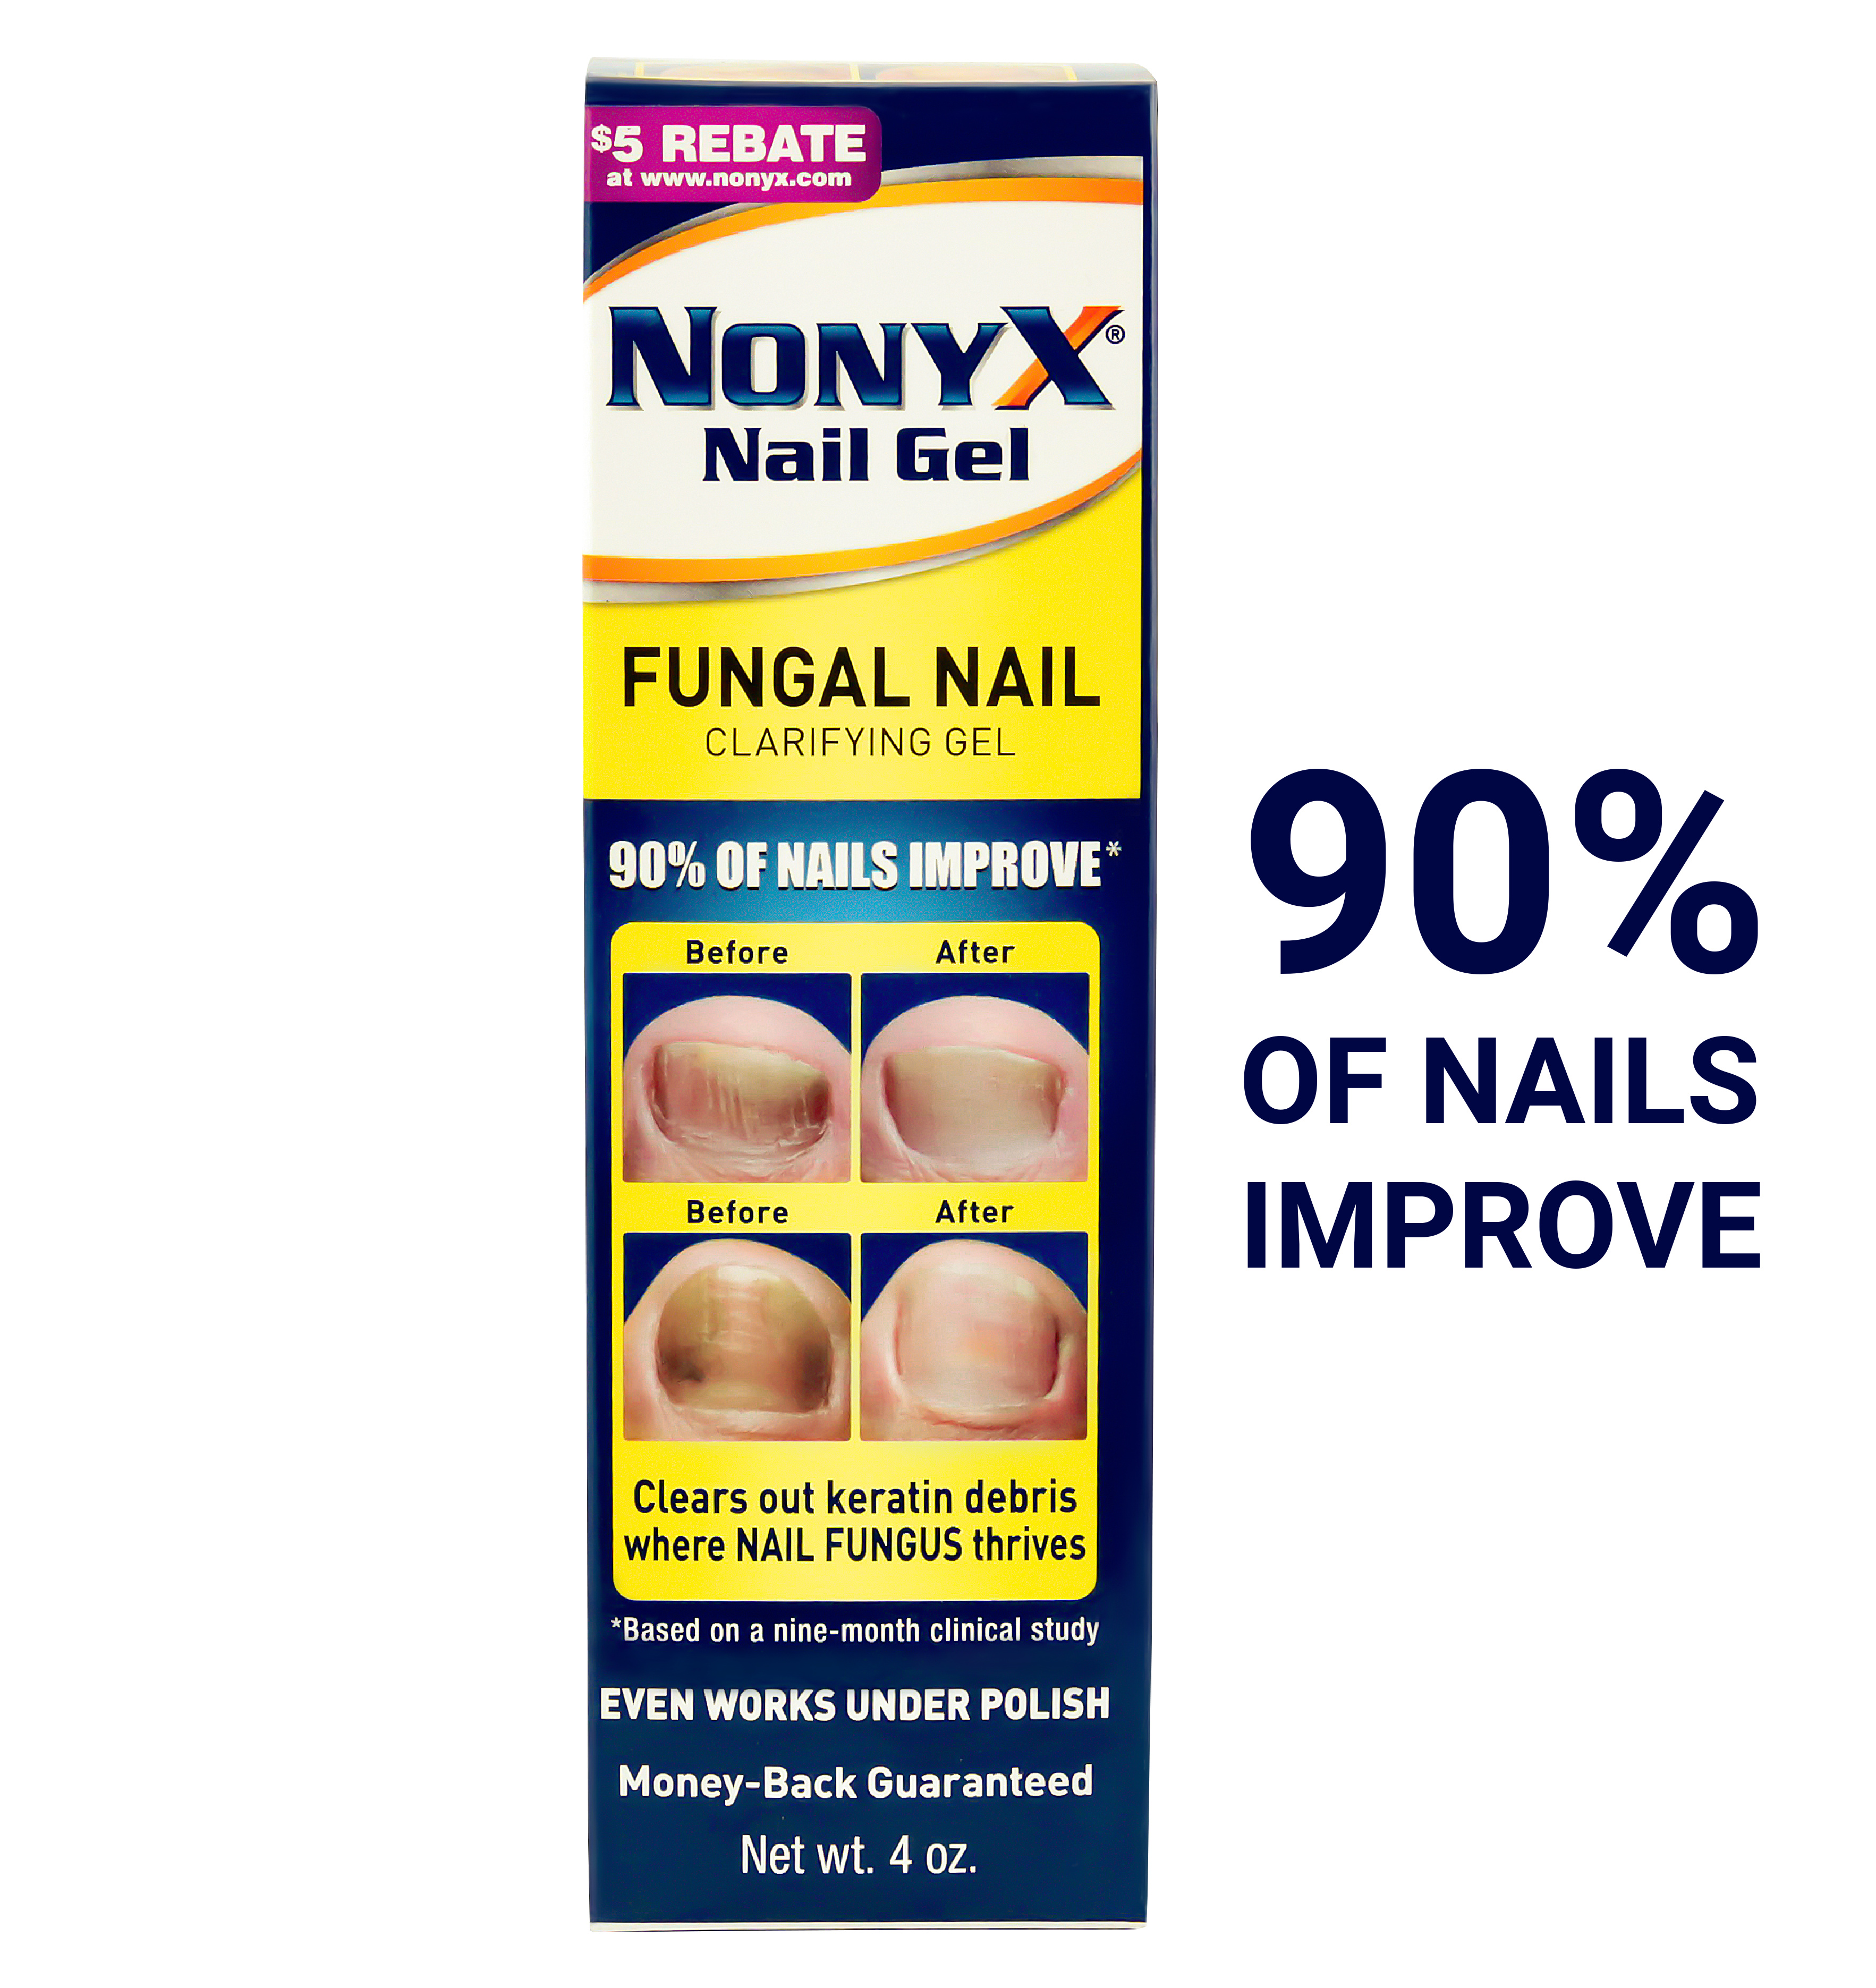 Nonyx Fungal Nail Clarifying Gel | Clinically Proven Effective for Fungus Damaged Toenails | Results are Money-back Guaranteed, 4 oz. - image 1 of 9